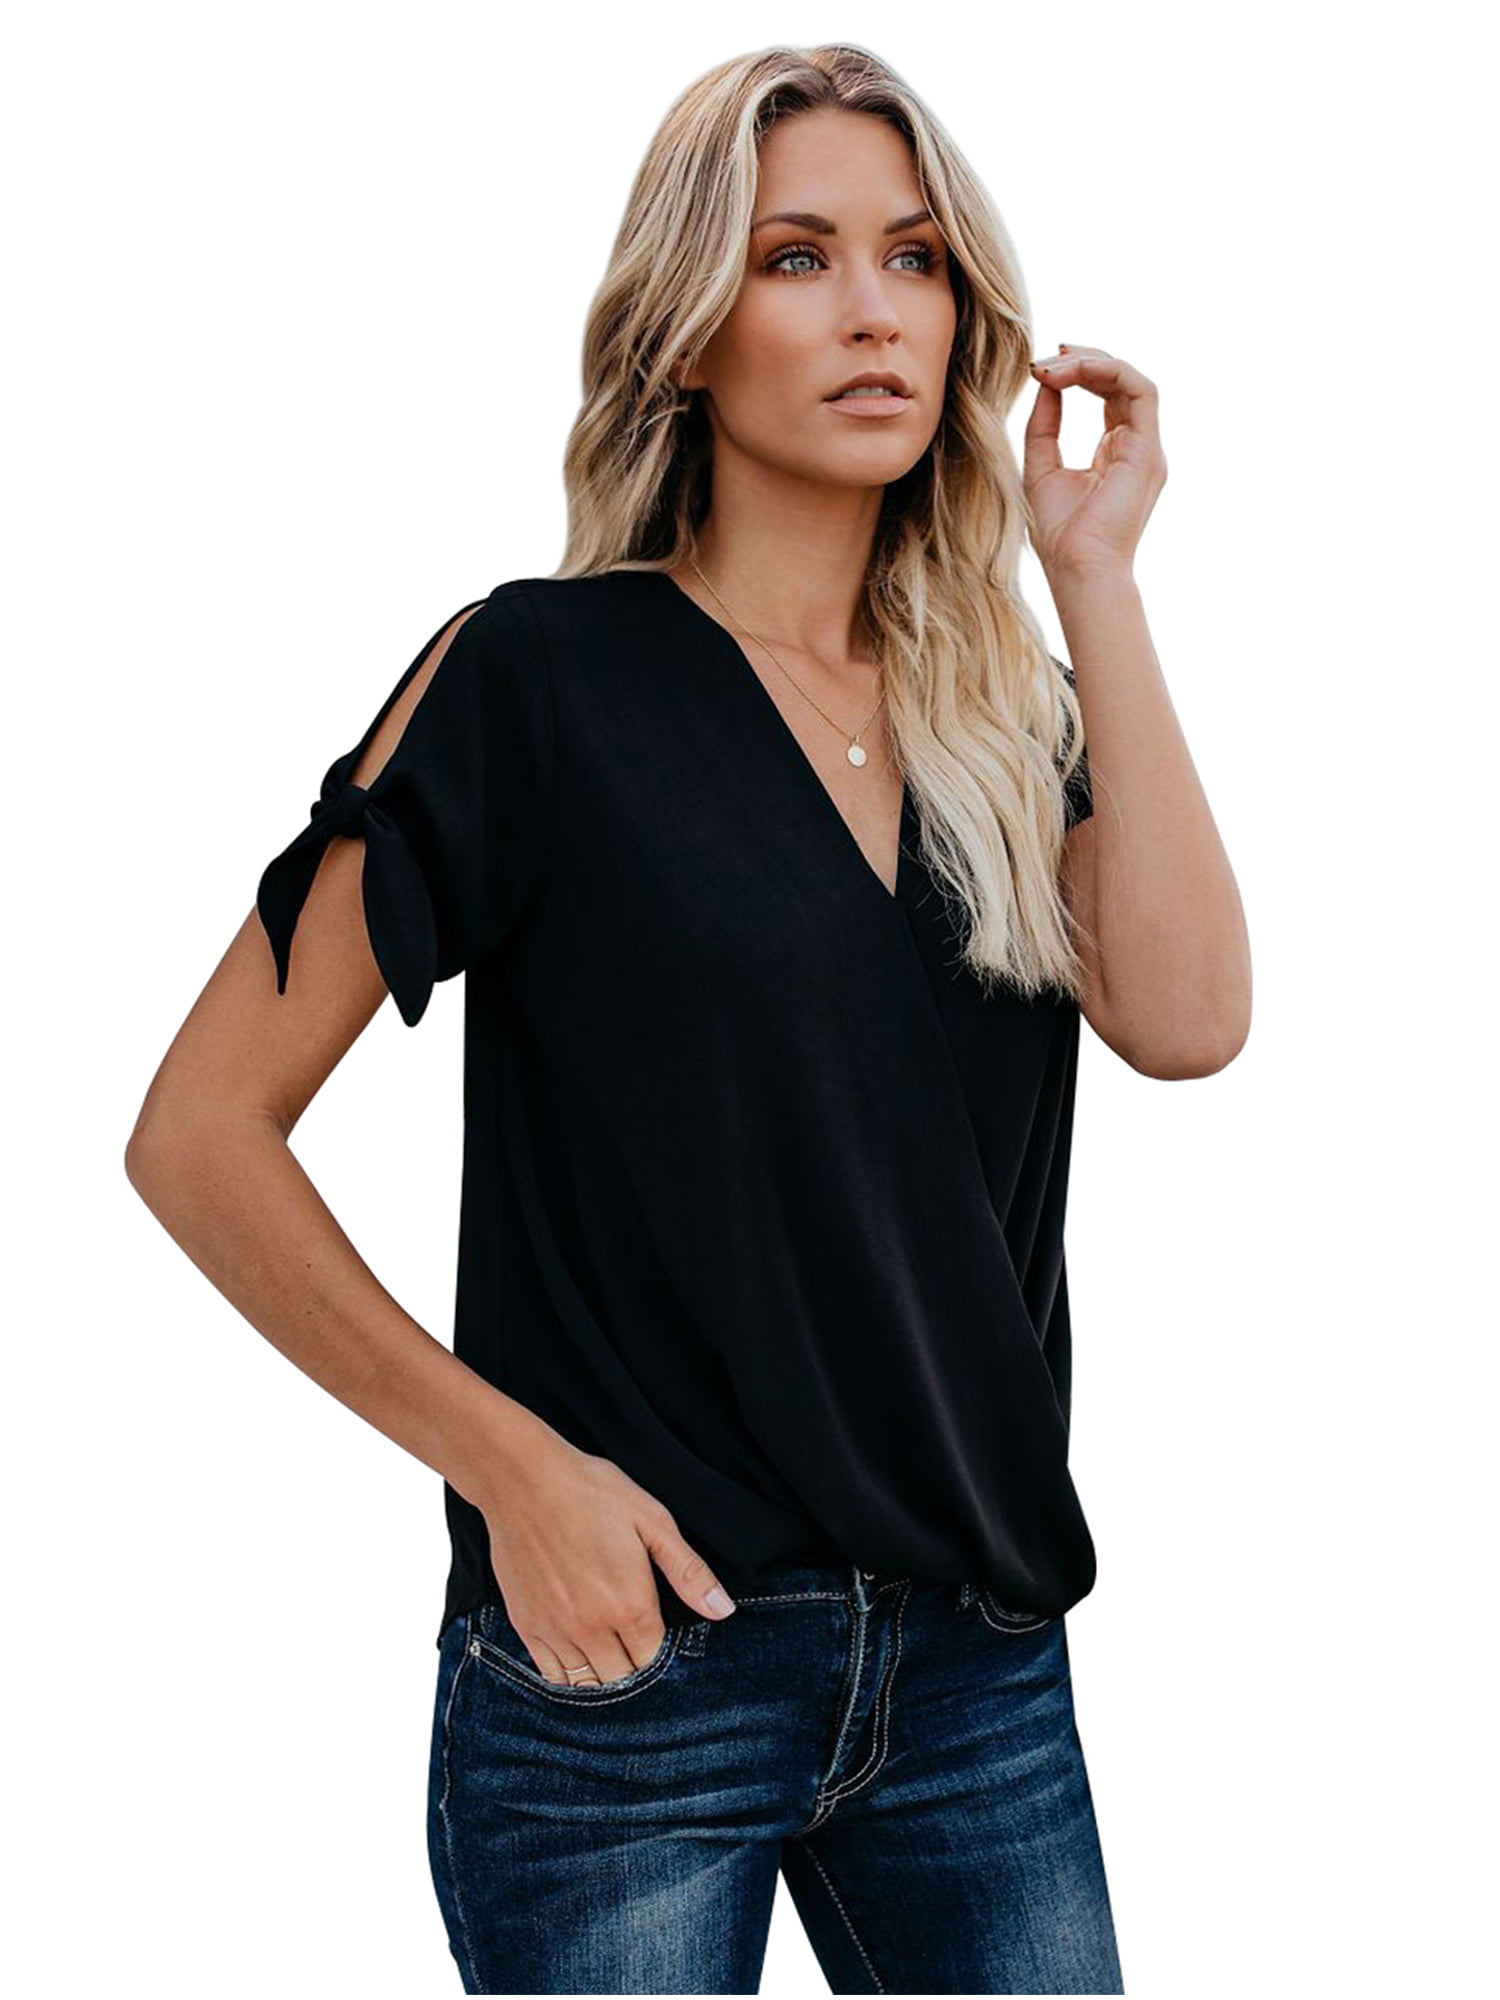 Csndyce - Women's Loose Fit Blouses Short Sleeve V Neck Pull Up Shirts ...